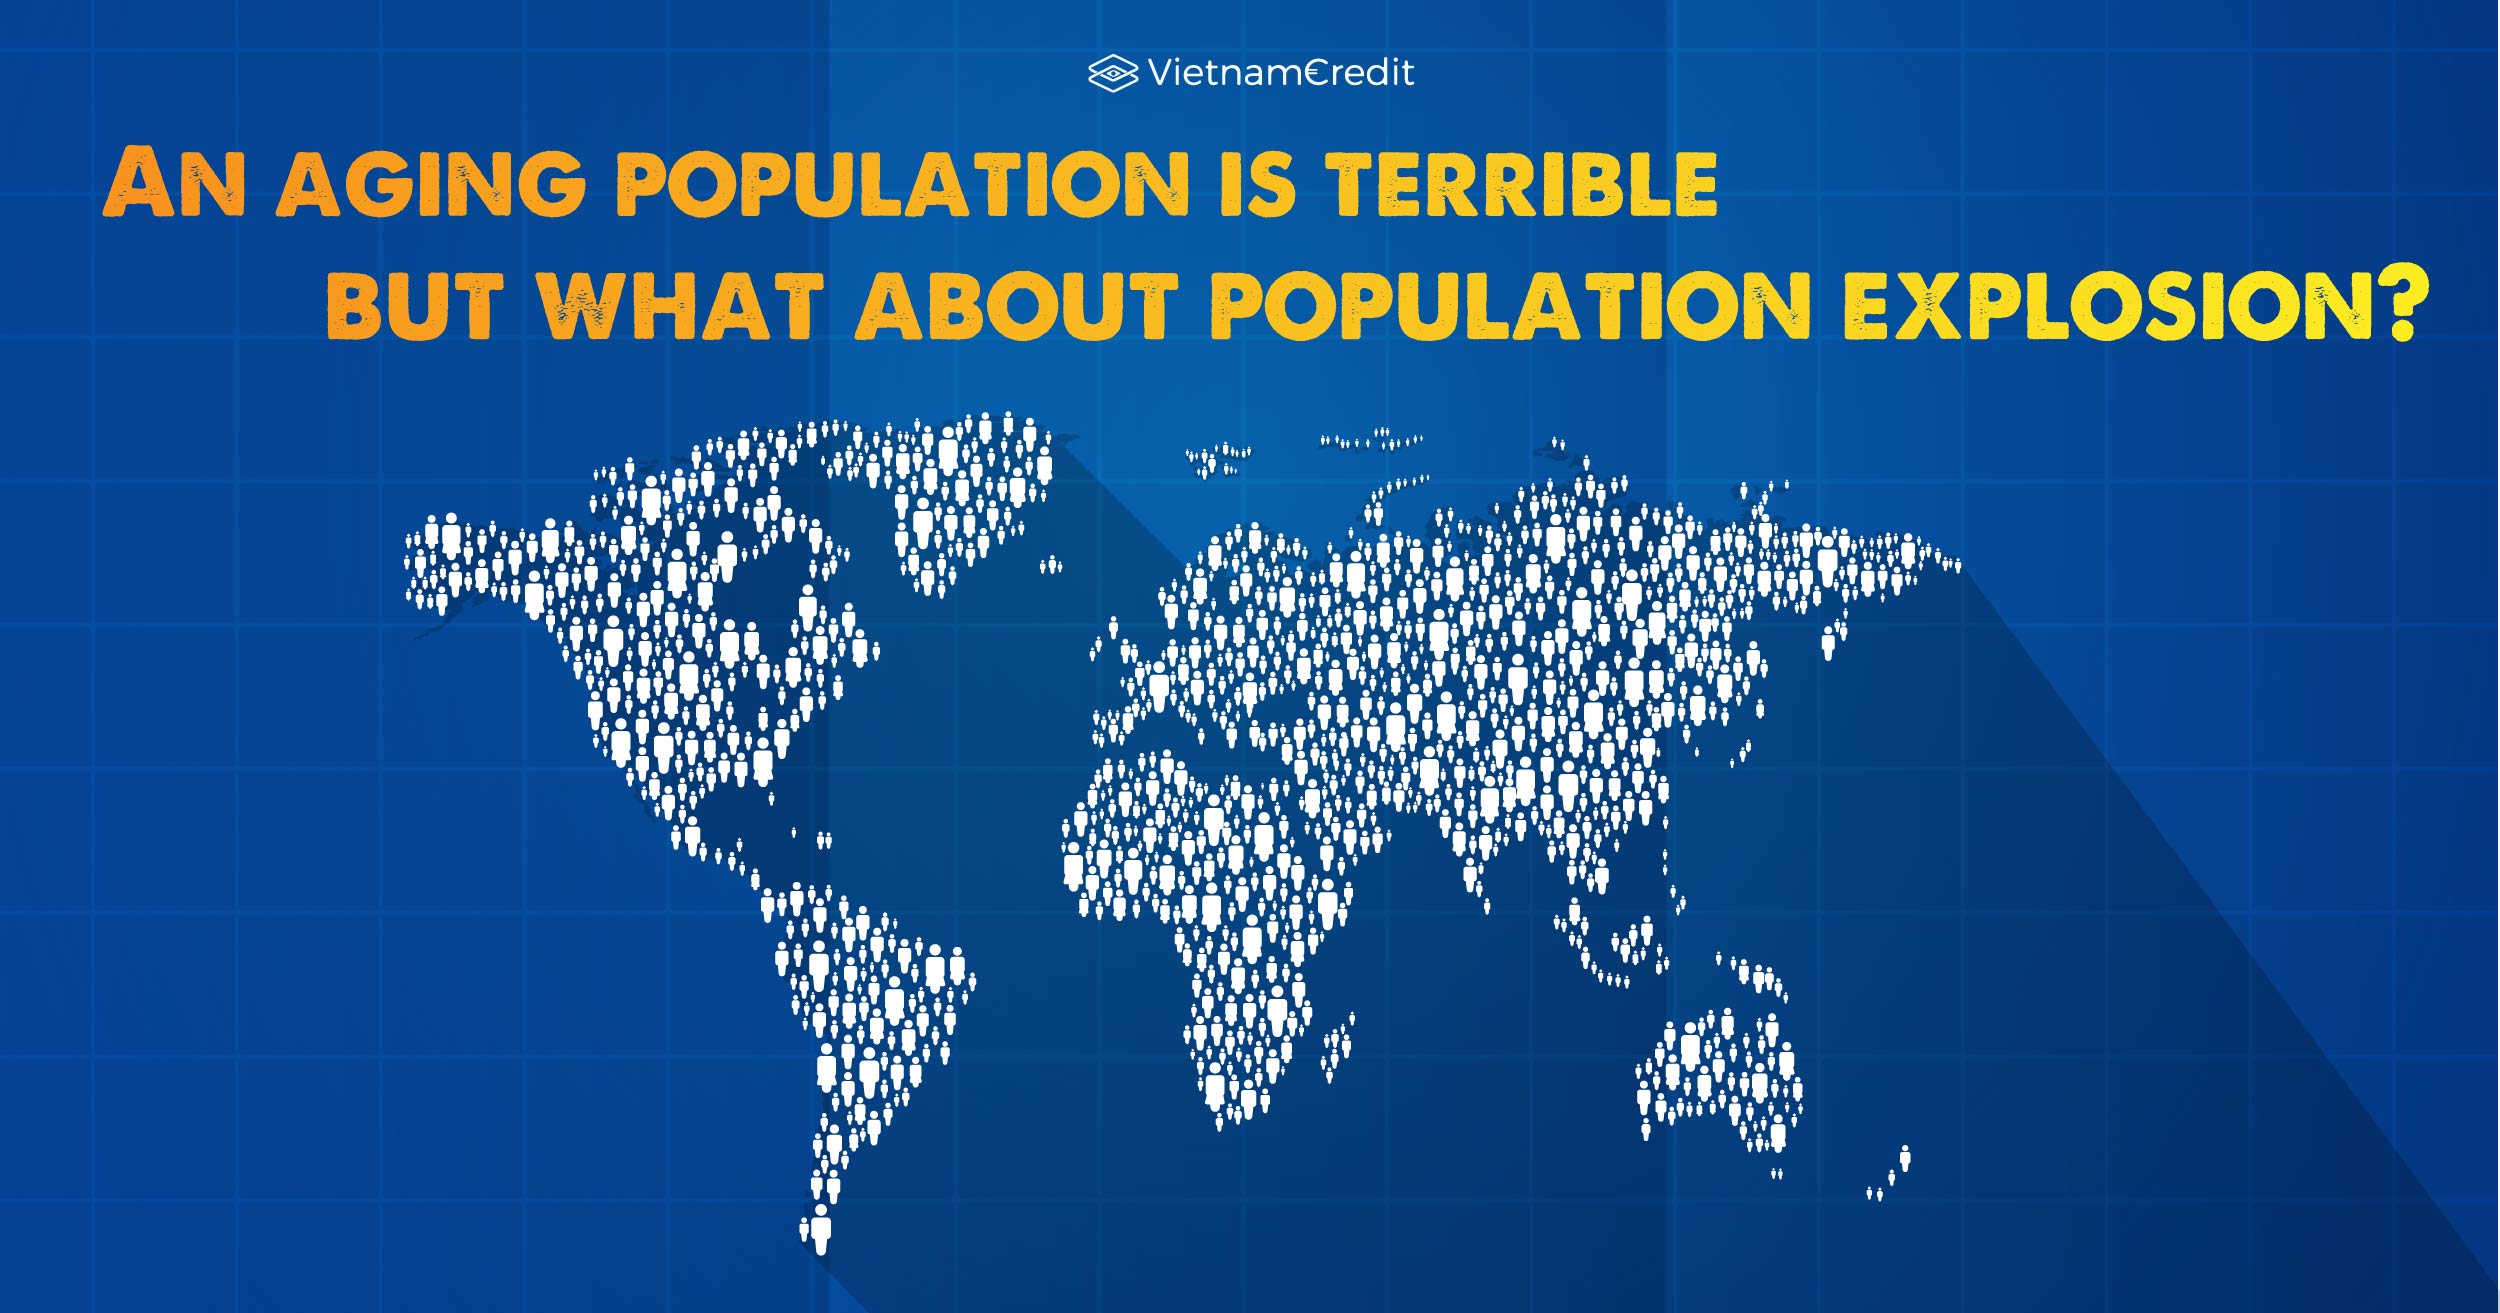 An aging population is terrible, but what about population explosion?